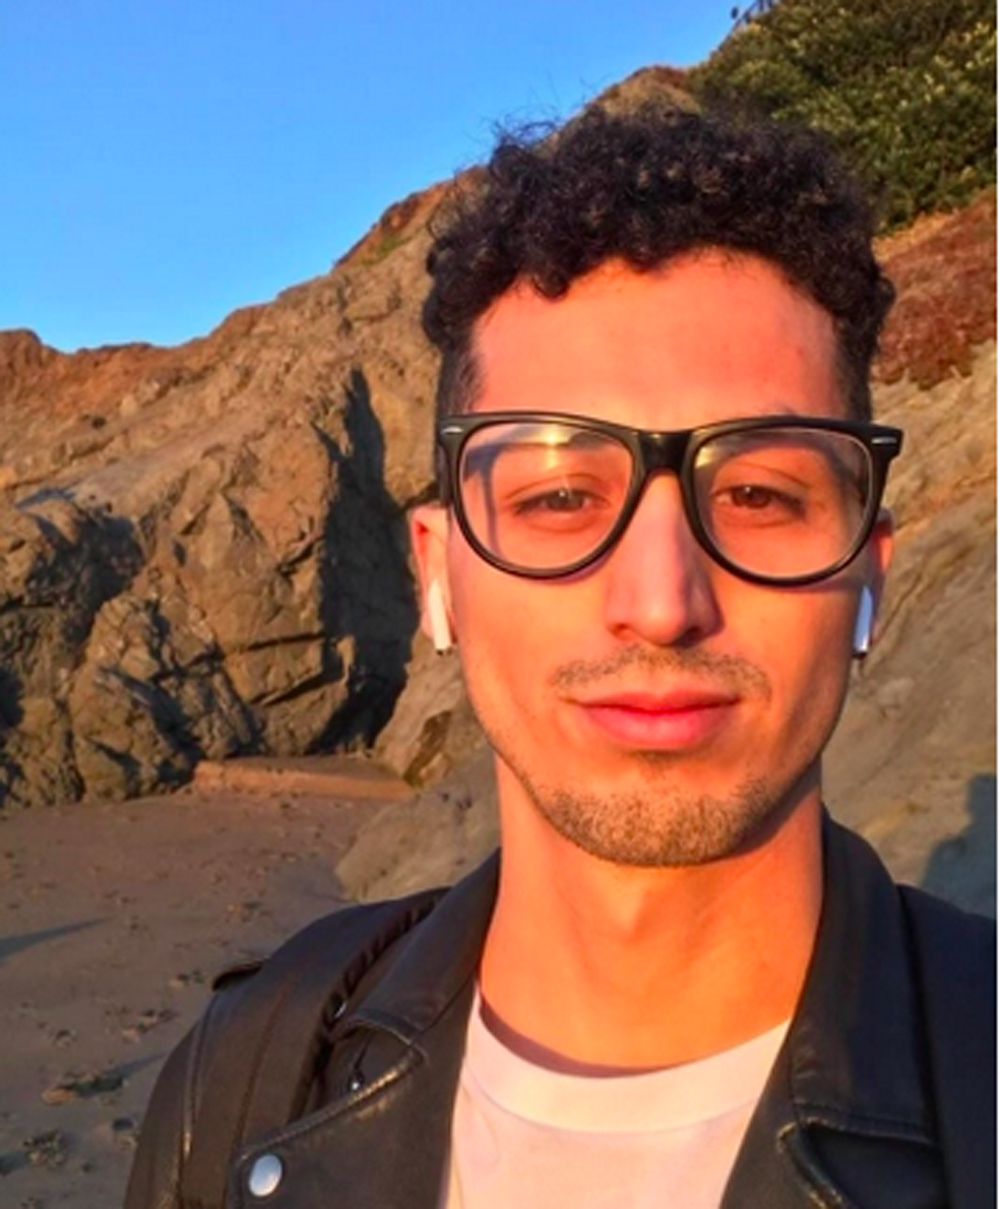 It took Vlad Carrillo a year to figure out how to get tested after moving to Bishop, California. Getting a home kit through the mail afforded privacy and helped Carrillo avoid the stigma of testing.